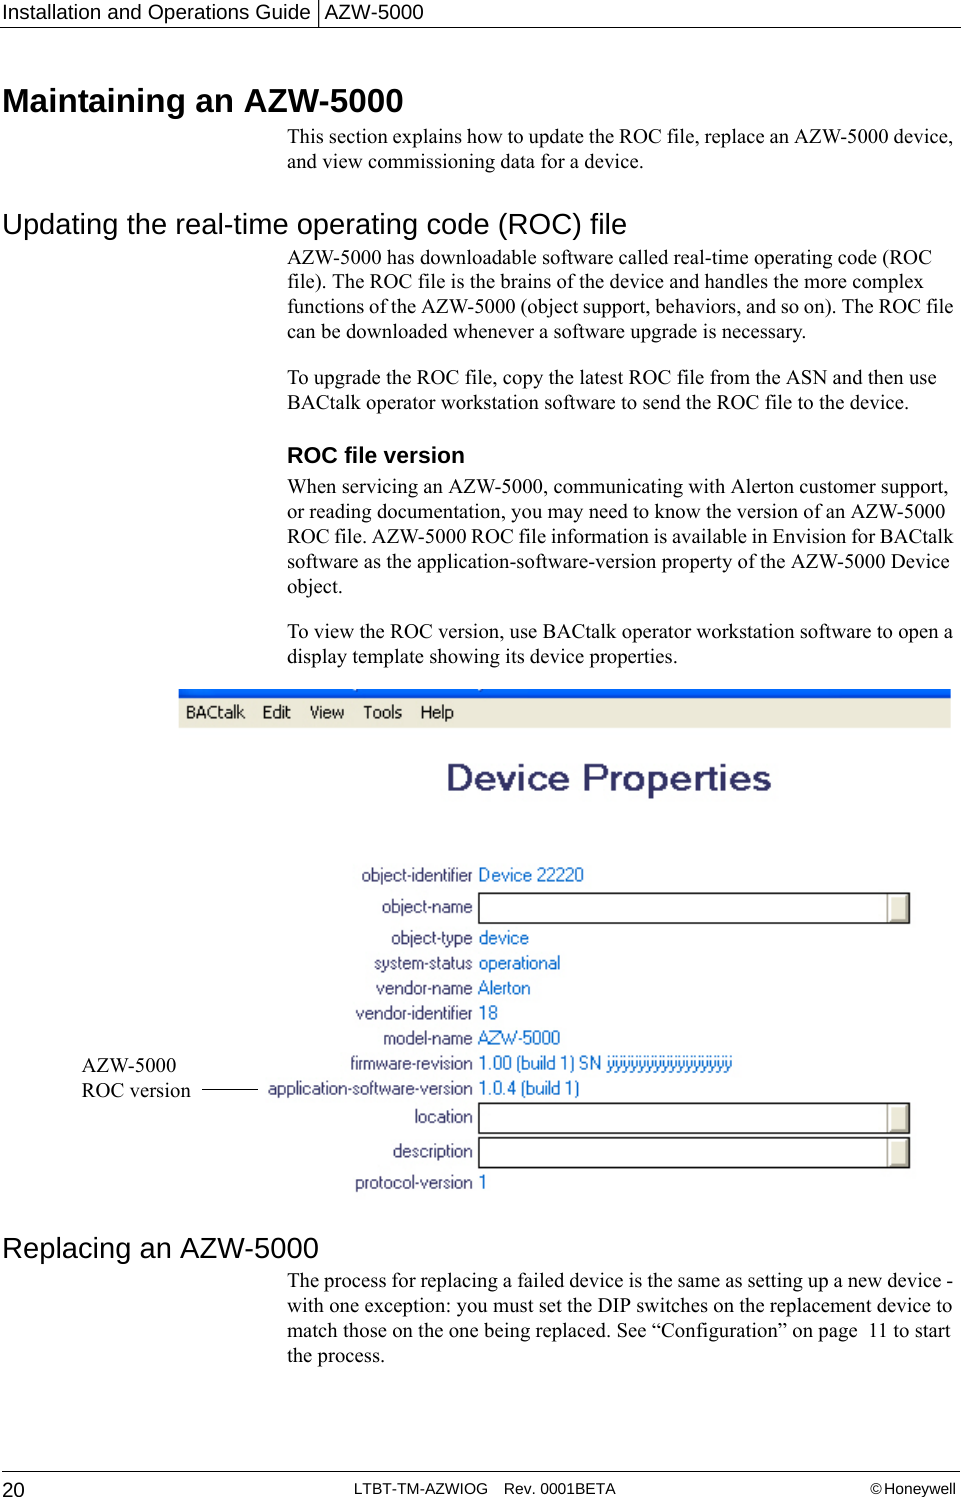 Installation and Operations Guide | AZW-500020 LTBT-TM-AZWIOG Rev. 0001BETA © Honeywell Maintaining an AZW-5000This section explains how to update the ROC file, replace an AZW-5000 device, and view commissioning data for a device.Updating the real-time operating code (ROC) fileAZW-5000 has downloadable software called real-time operating code (ROC file). The ROC file is the brains of the device and handles the more complex functions of the AZW-5000 (object support, behaviors, and so on). The ROC file can be downloaded whenever a software upgrade is necessary. To upgrade the ROC file, copy the latest ROC file from the ASN and then use BACtalk operator workstation software to send the ROC file to the device.ROC file version When servicing an AZW-5000, communicating with Alerton customer support, or reading documentation, you may need to know the version of an AZW-5000 ROC file. AZW-5000 ROC file information is available in Envision for BACtalk software as the application-software-version property of the AZW-5000 Device object.To view the ROC version, use BACtalk operator workstation software to open a display template showing its device properties.Replacing an AZW-5000The process for replacing a failed device is the same as setting up a new device - with one exception: you must set the DIP switches on the replacement device to match those on the one being replaced. See “Configuration” on page  11 to start the process.AZW-5000 ROC version